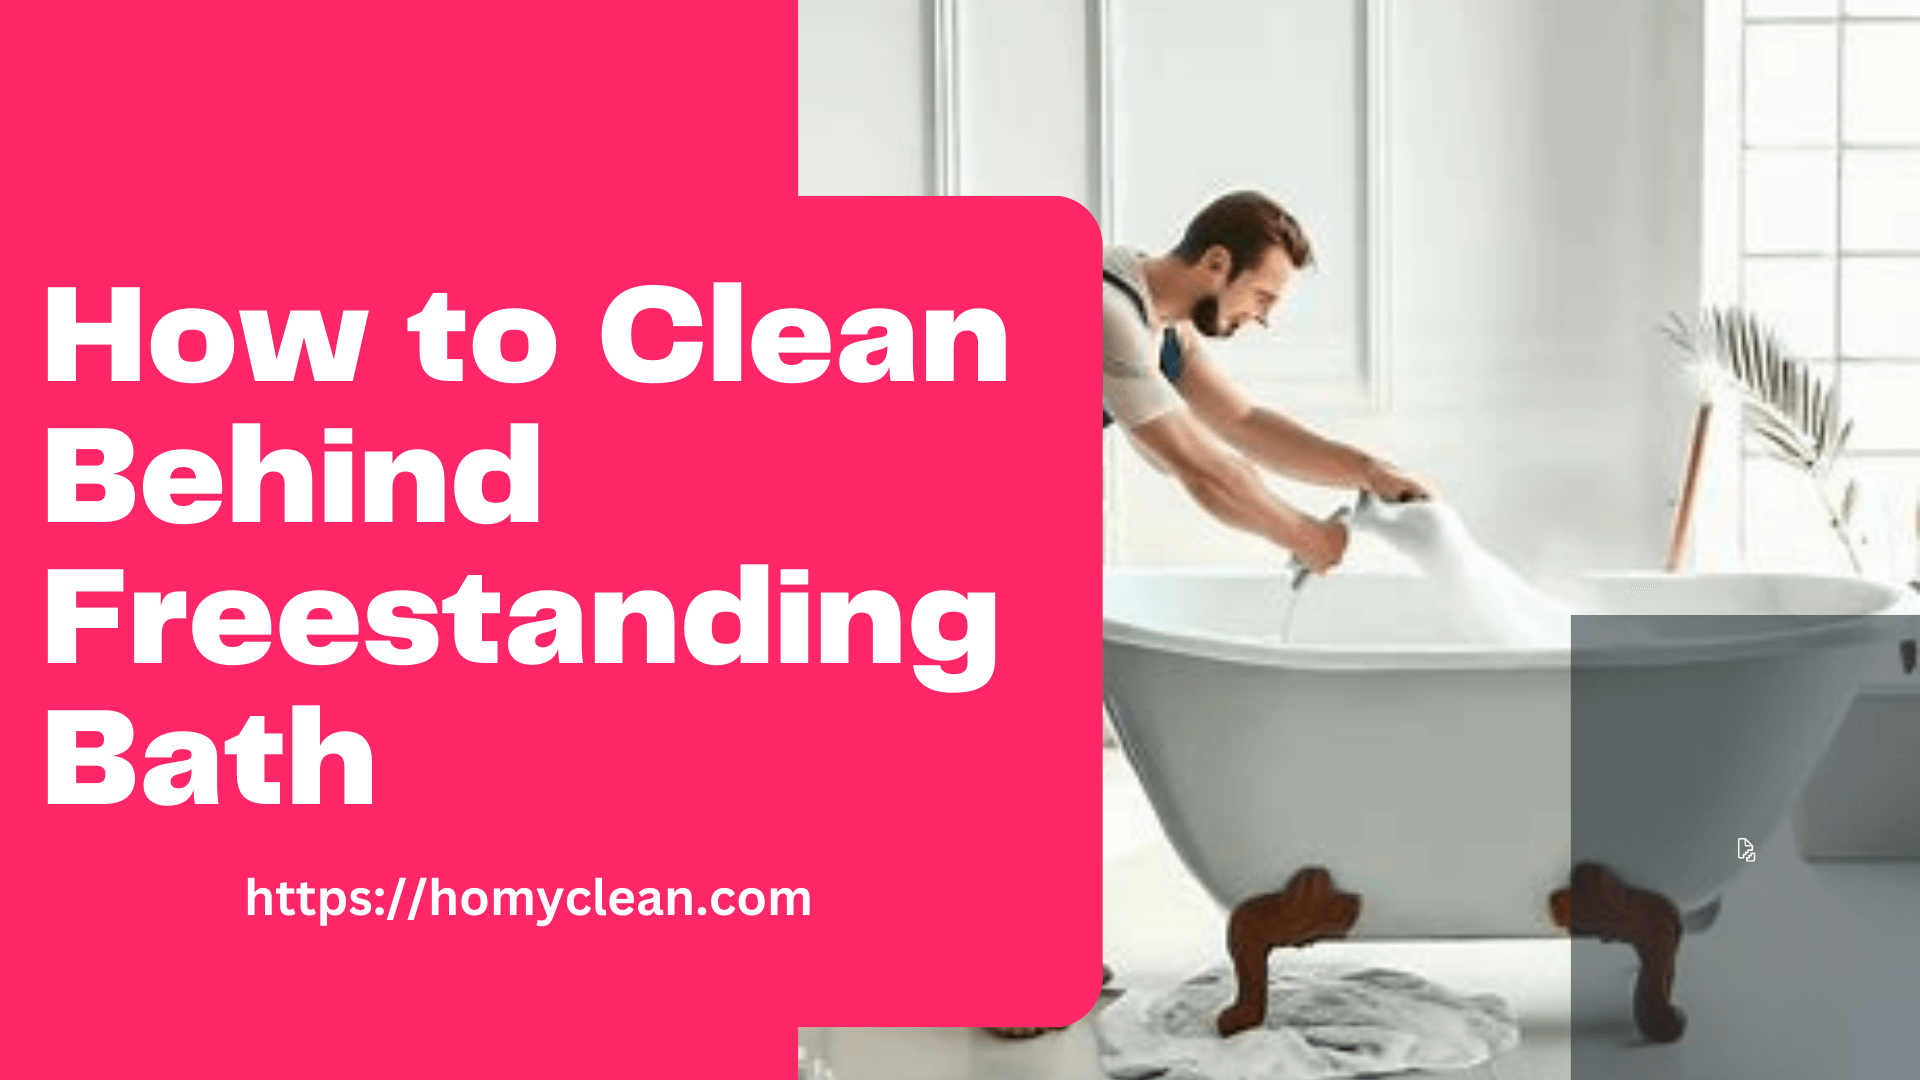  How to Clean Behind Freestanding Bath